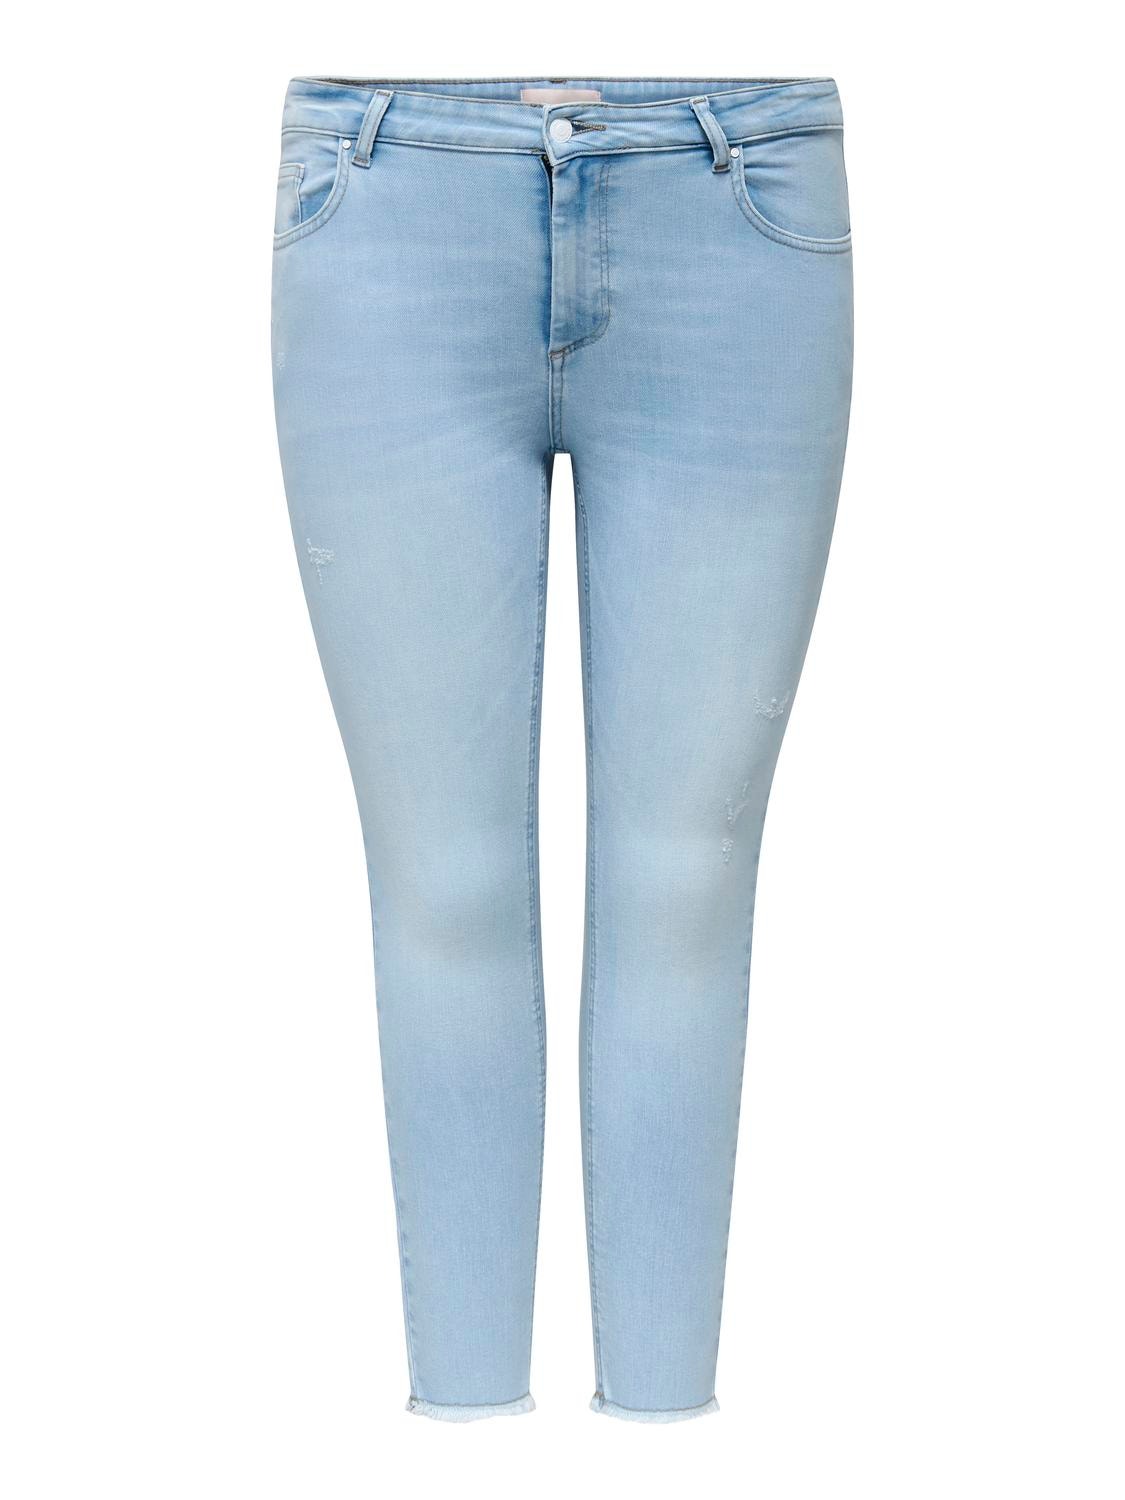 ONLY Skinny Fit Raw hems Jeans -Light Blue Bleached Denim - 15318334